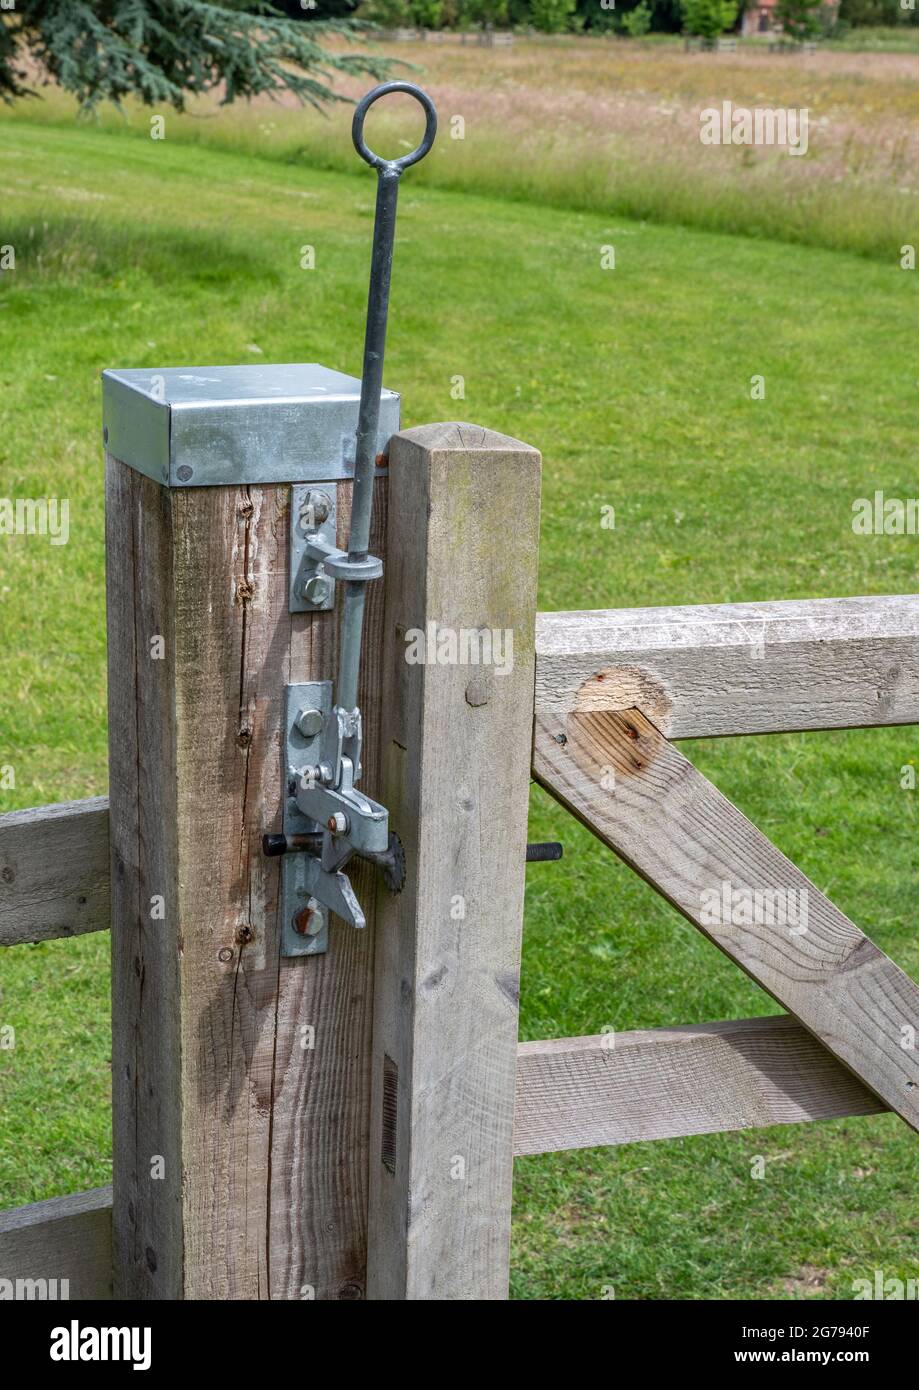 Metal gate locking mechanisim mounted on a wooden gate post with metal cap Stock Photo